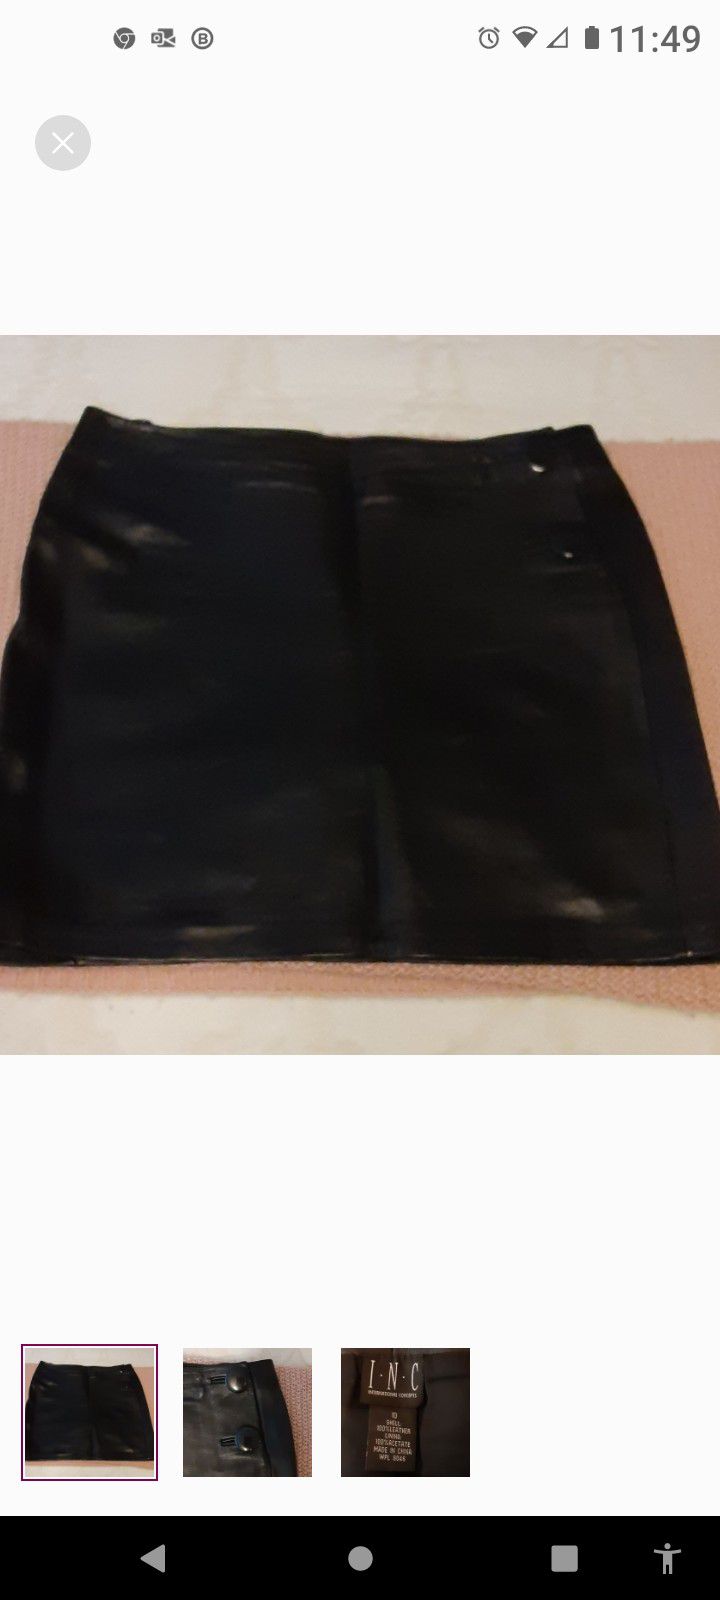 Black leather mini skirt by Inc, International Concepts, size 10